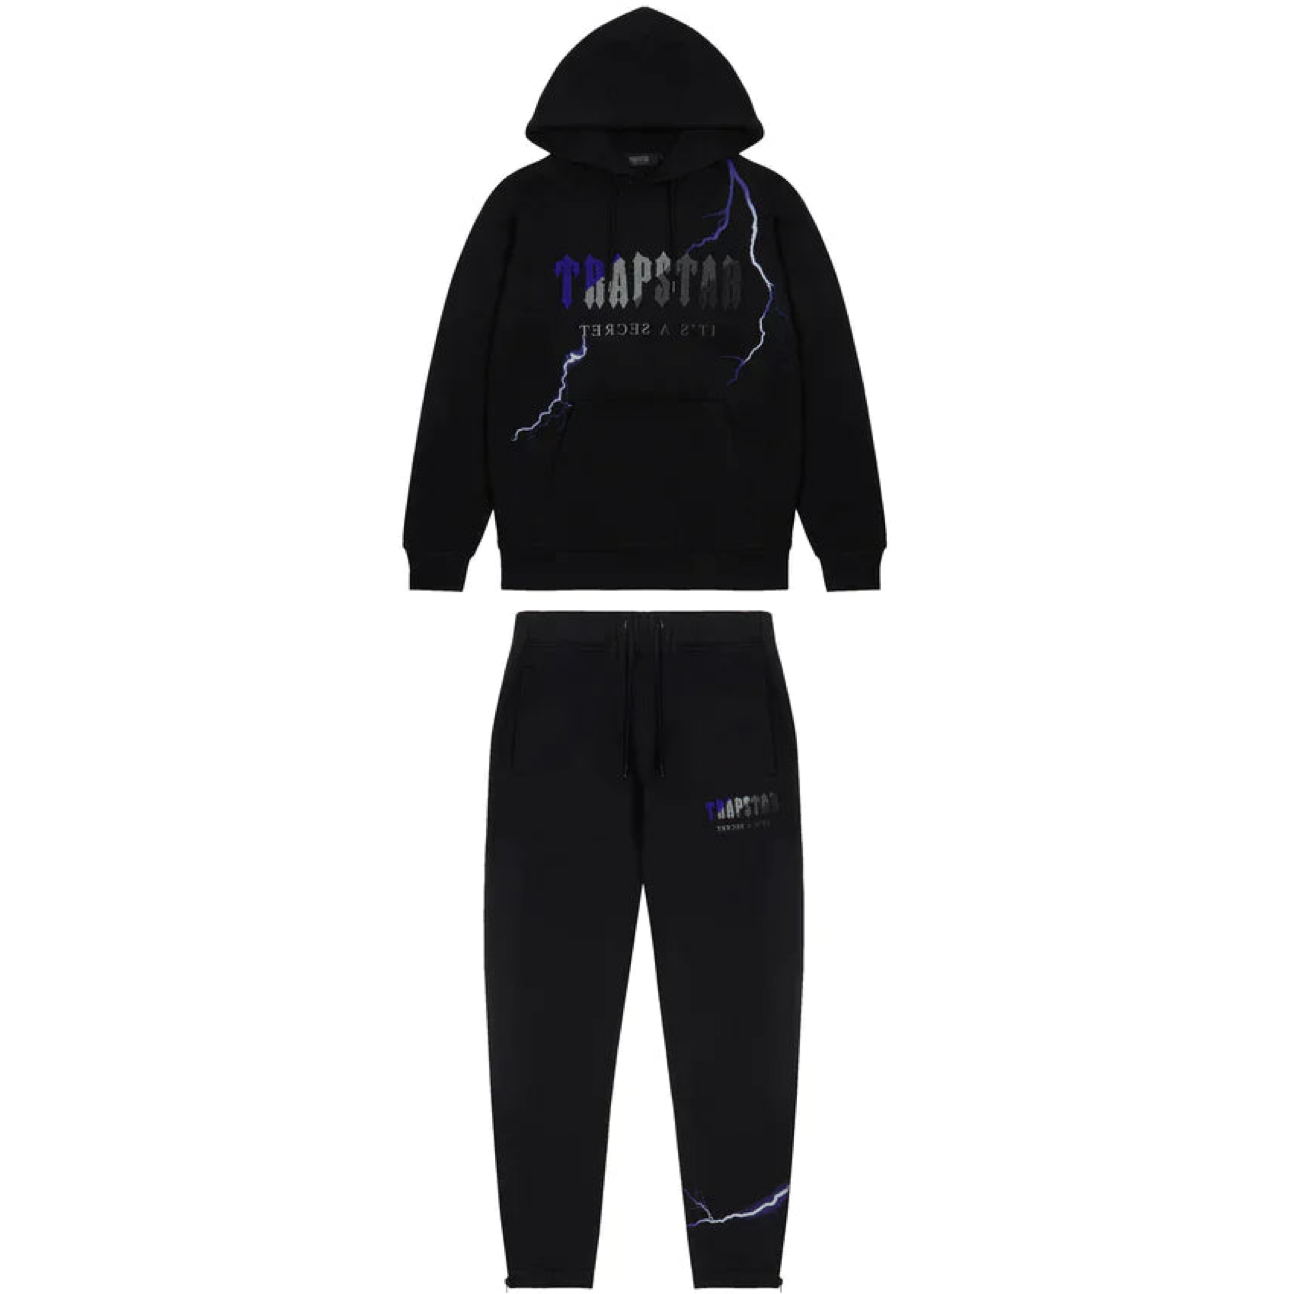 Trapstar Chenille Decoded Hooded Tracksuit Lightning Edition by Trapstar from £256.99